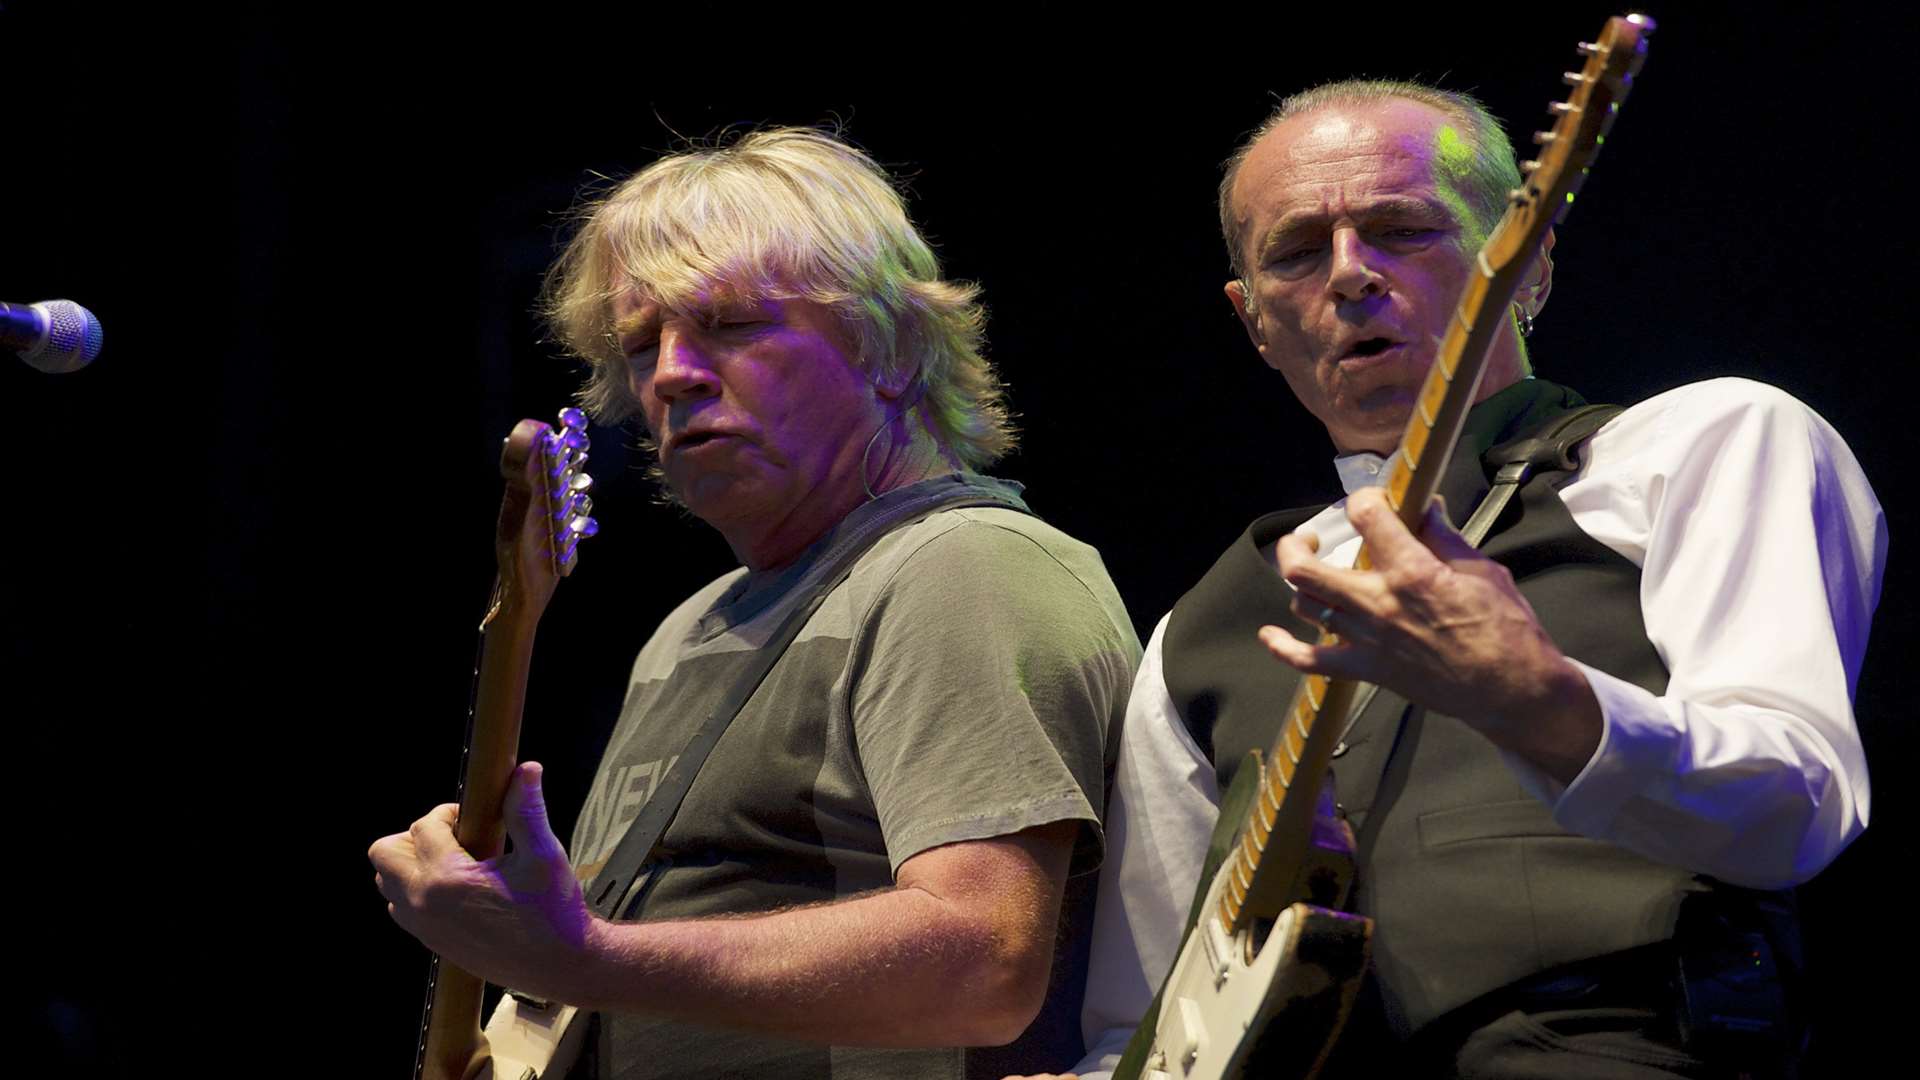 Rick Parfitt, left, and Francis Rossi. Status Quo play the first night at the Rochester Castle Concerts 2013